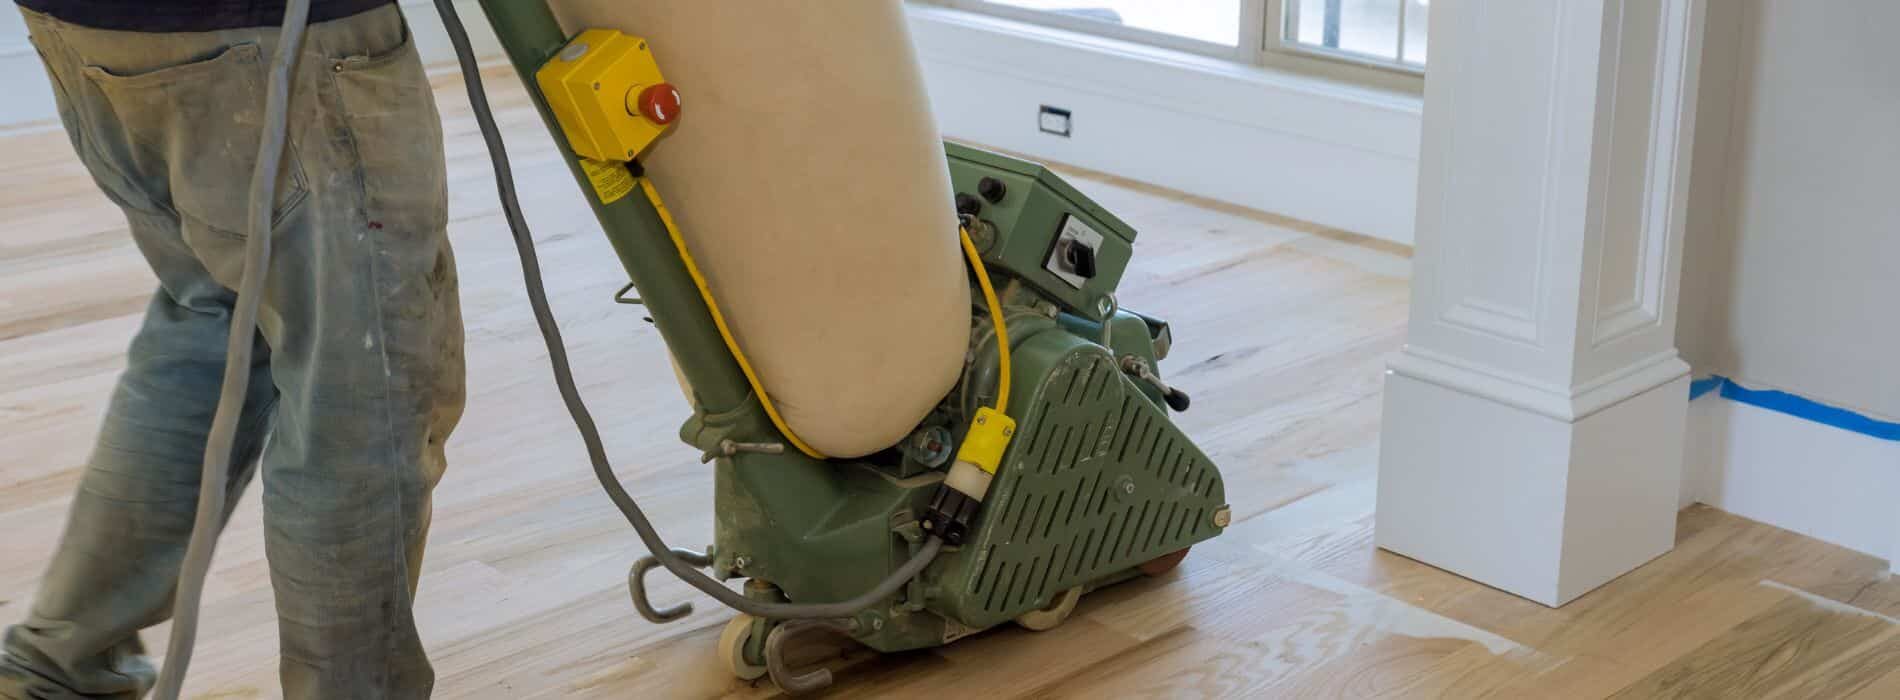 In Watford, Mr Sander® using a Bona Endless Belt, a powerful 200mmx750mm drum sander, for sanding parquet floors. With 1.5kW power and 240V voltage, it ensures efficient sanding.